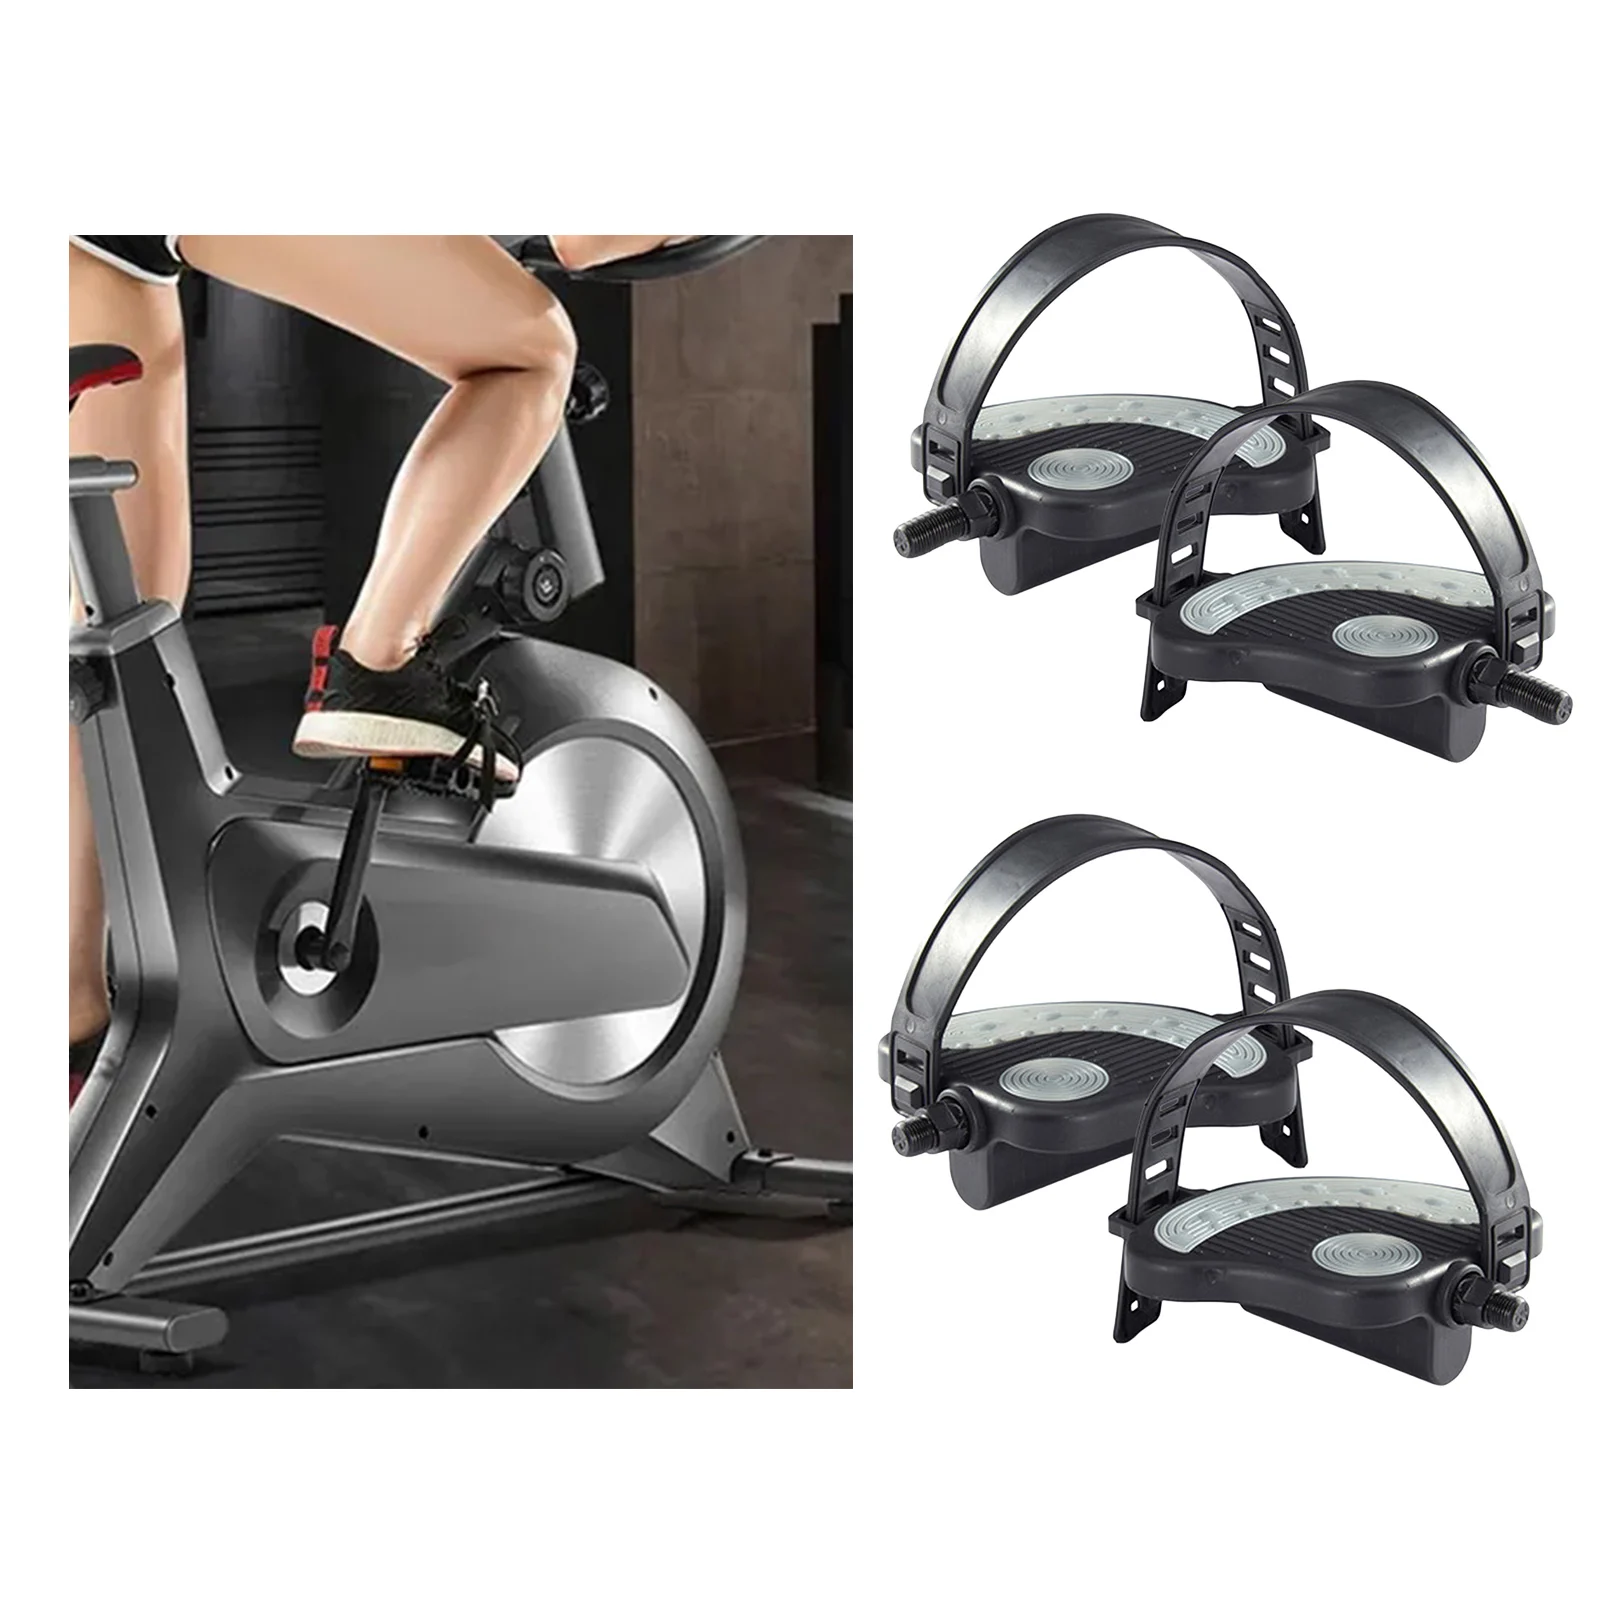 1 Pair Exercise Bike Pedals with Adjustable Straps Non Slip Home Gym Fitness Bike Indoor Platform Pedals Parts